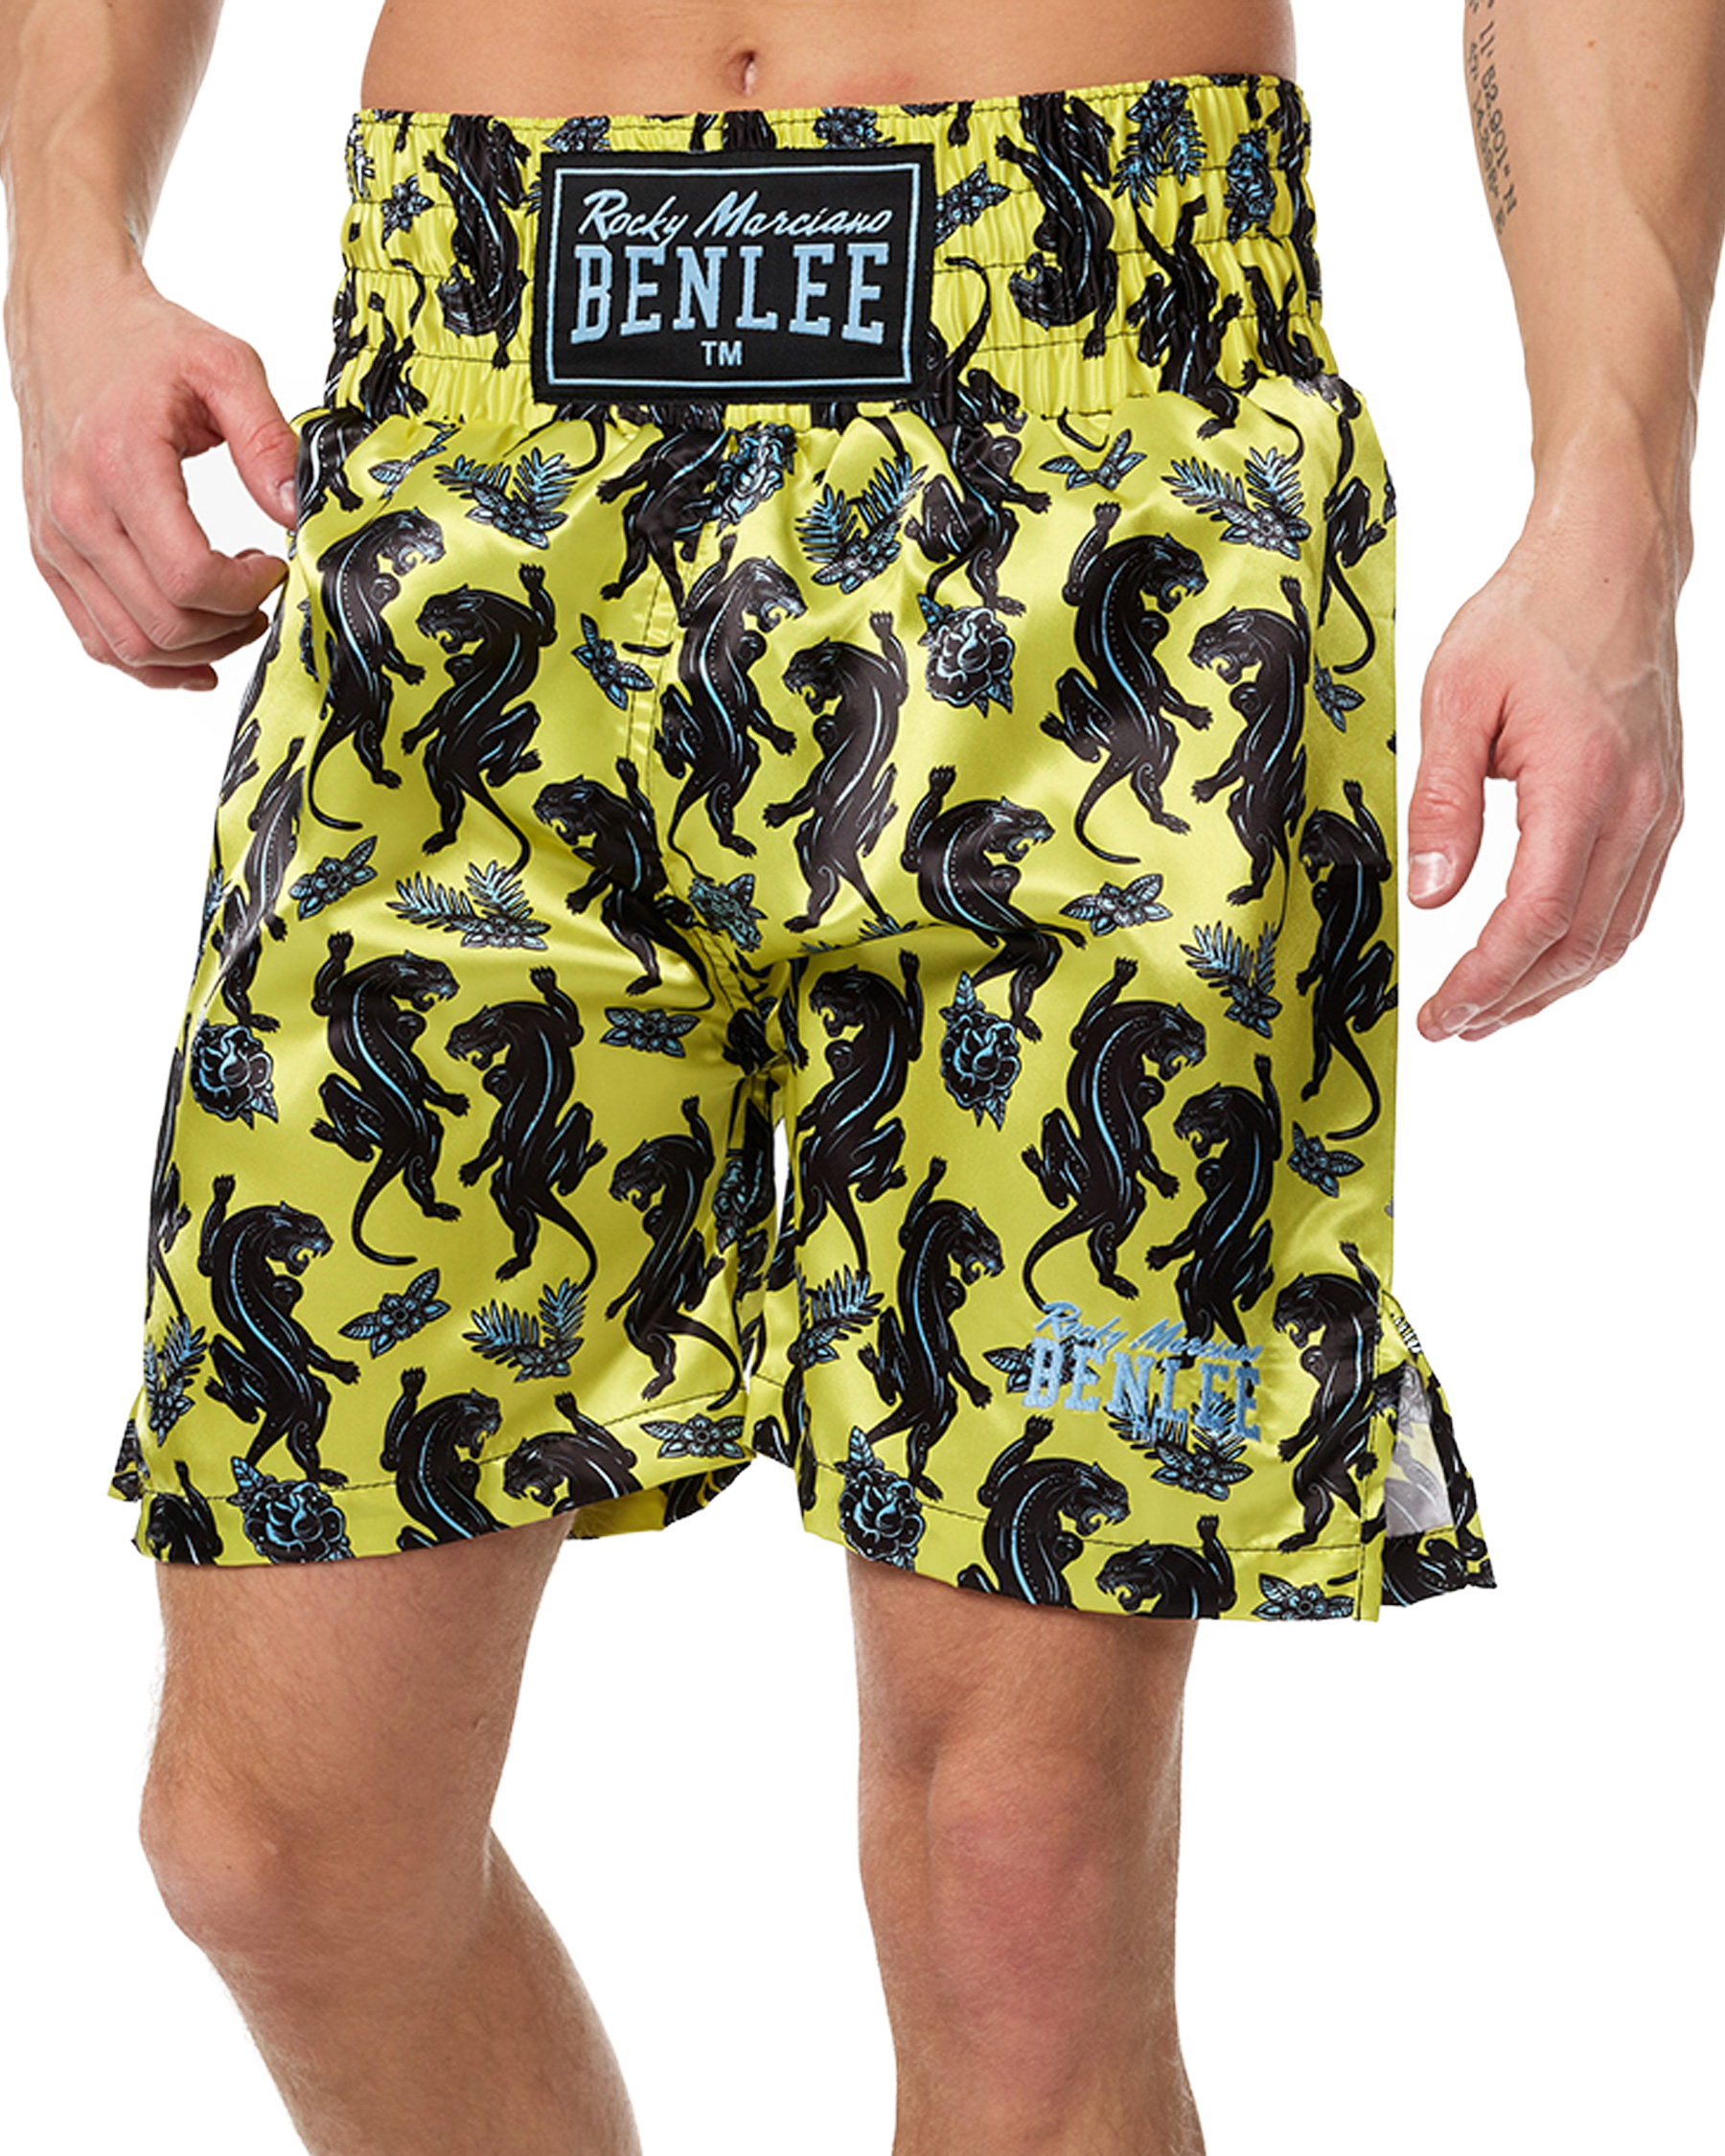 BenLee boxing trunks Panther